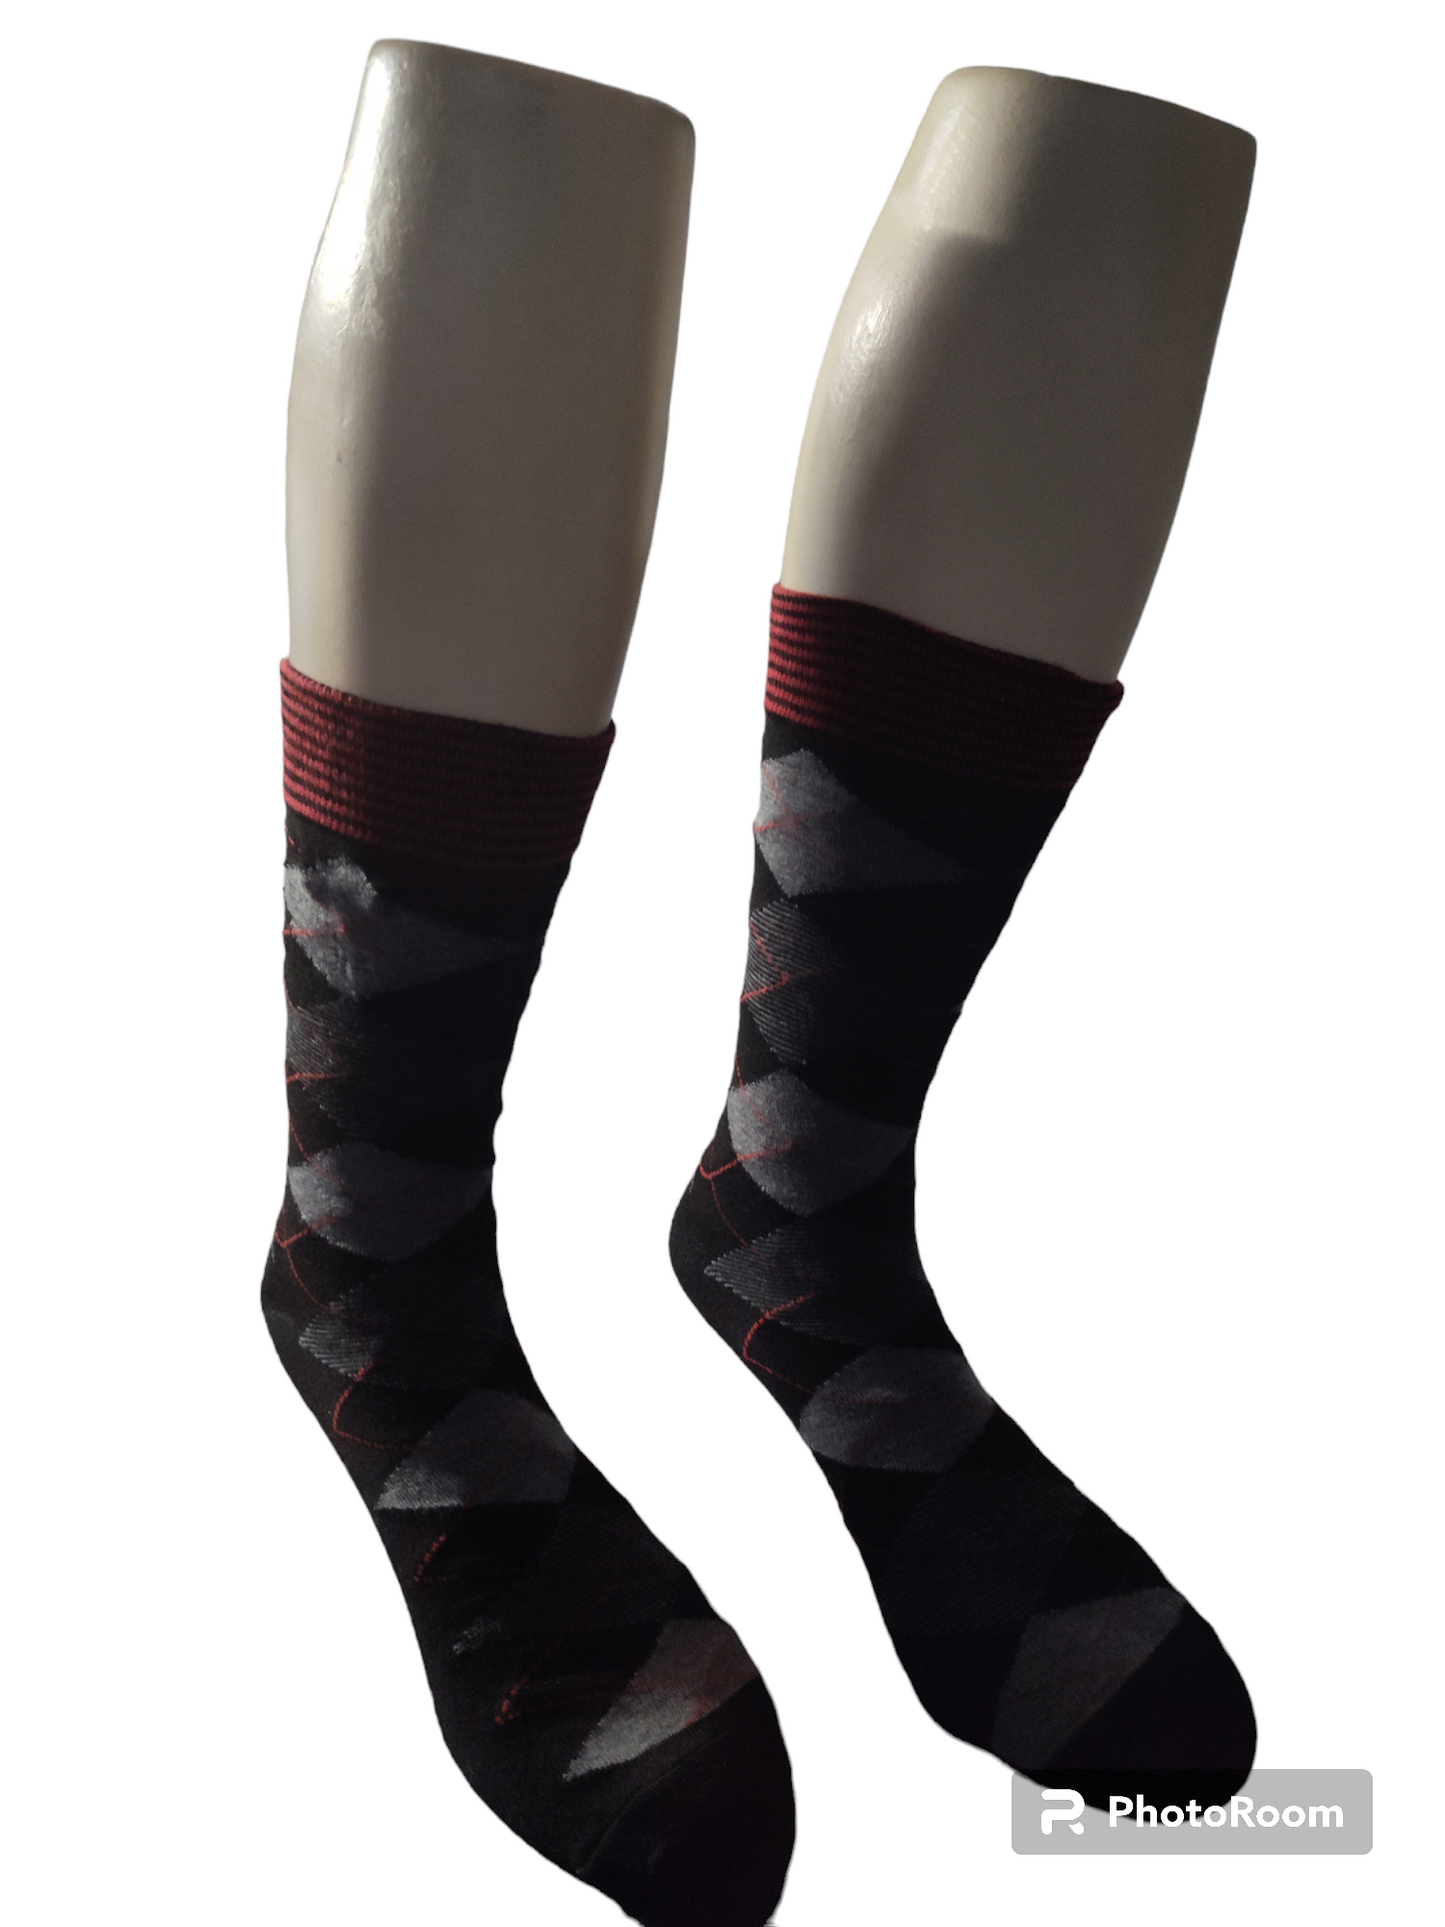 RED, GREY, AND BLACK SOCKS